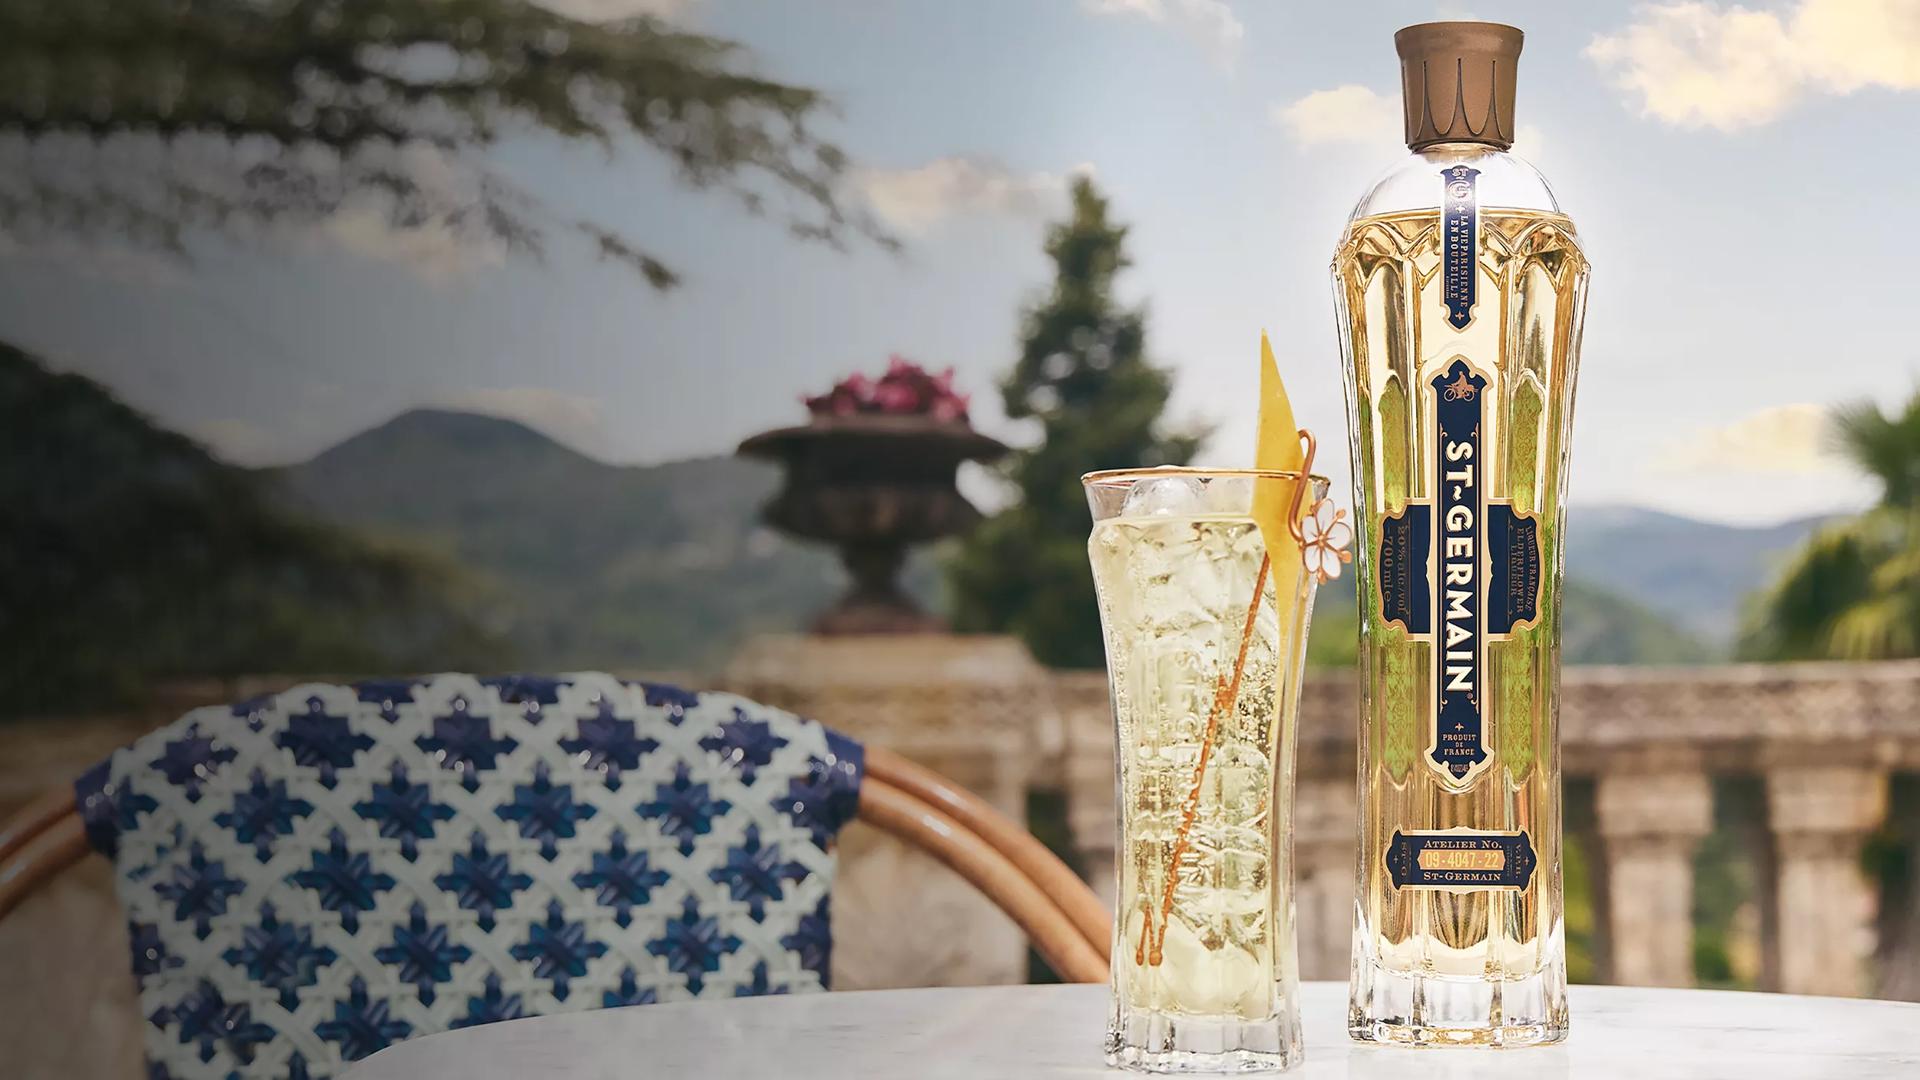 St-Germain's Meteoric Rise to Become 'Bartender's Ketchup